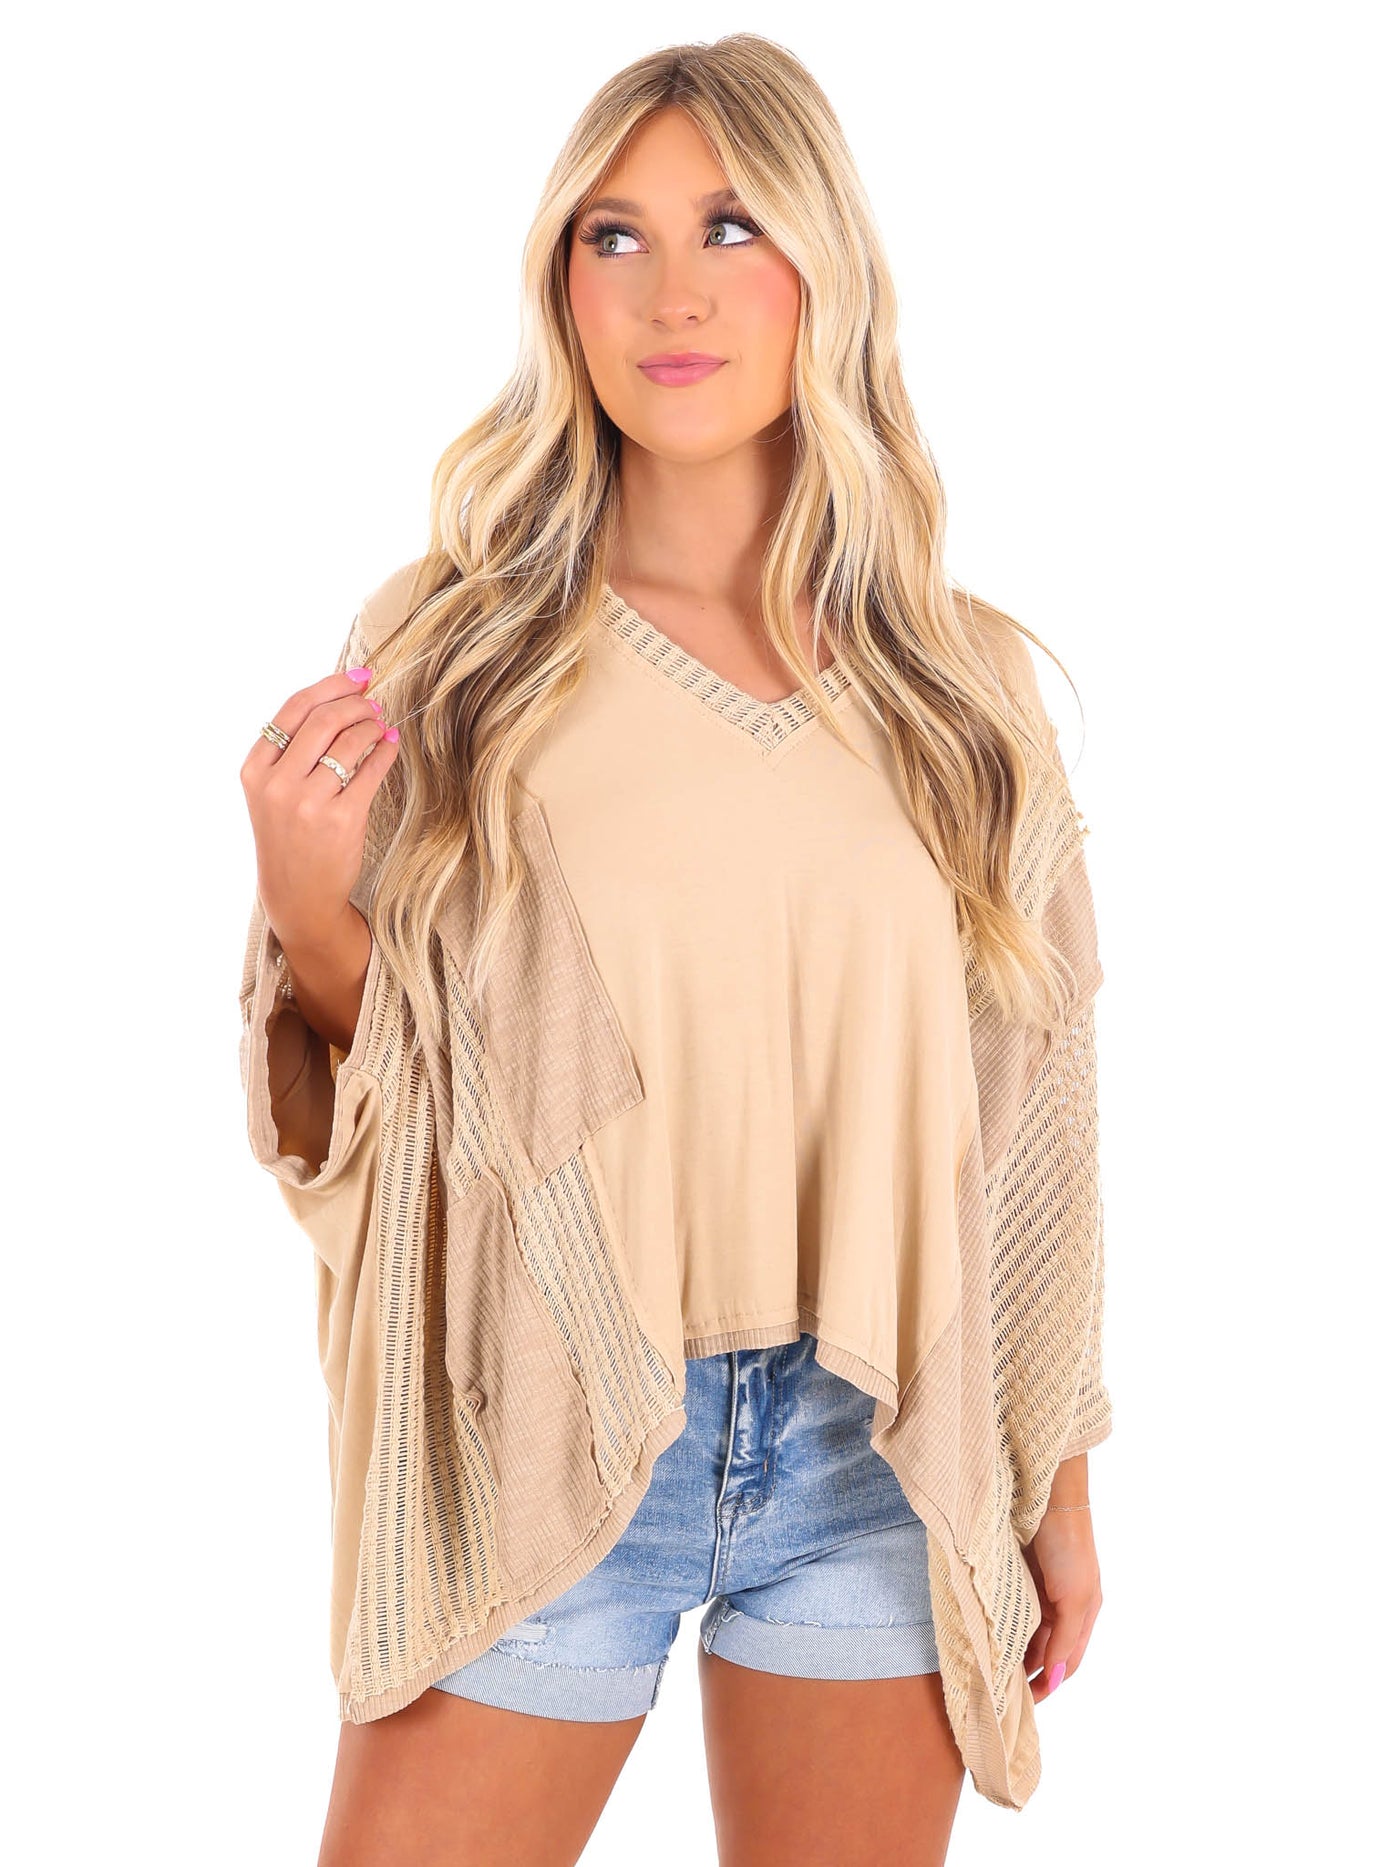 Change Your Mind Contrast Top